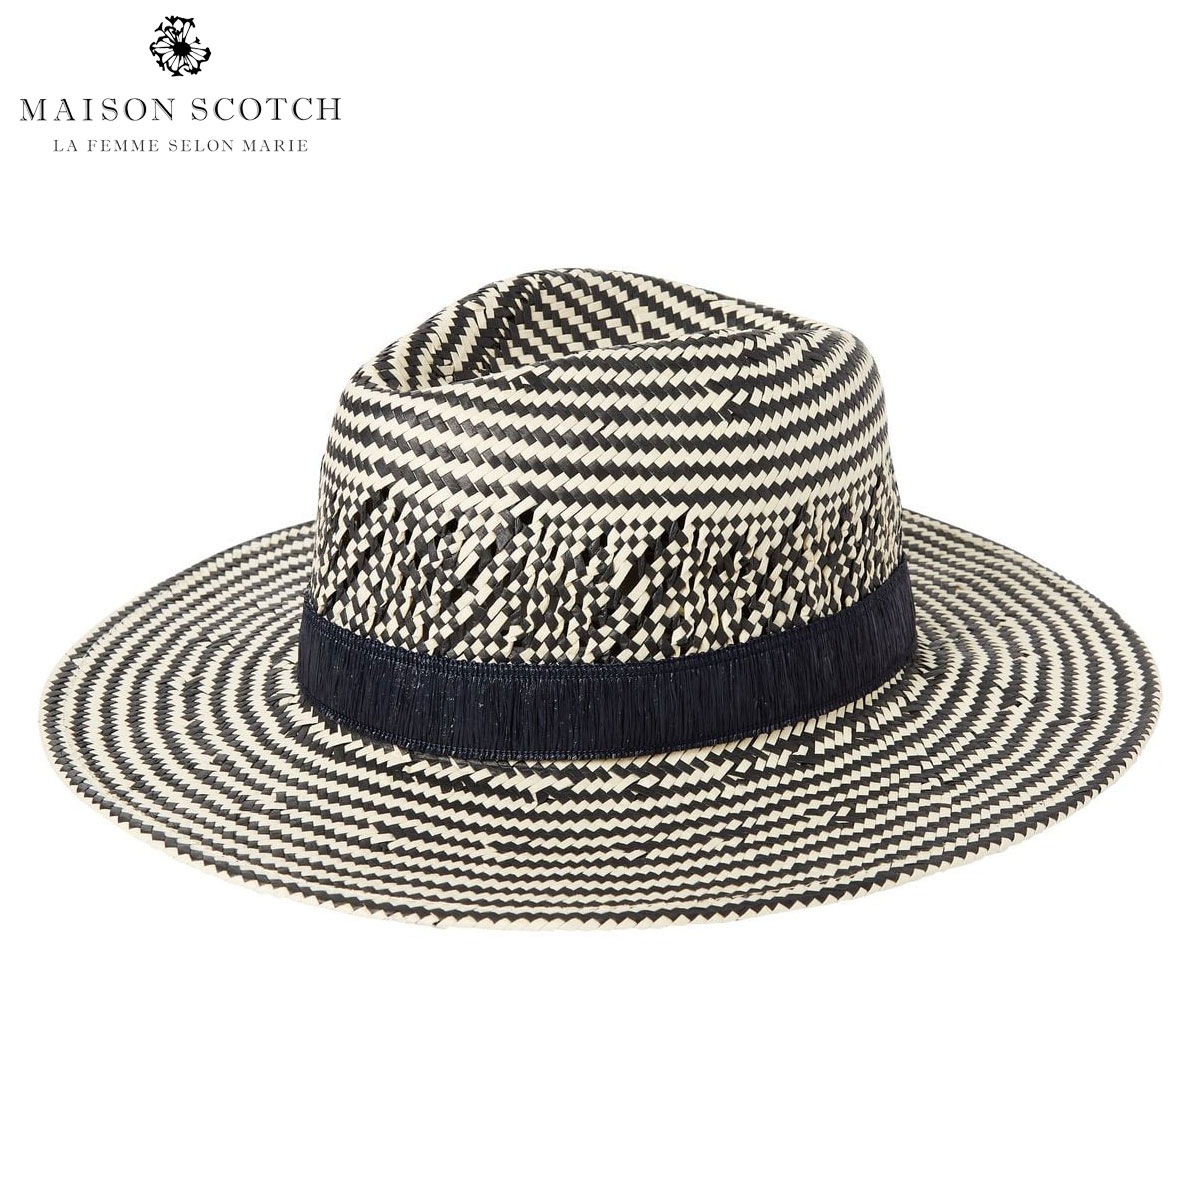 30%OFFセール  メゾンスコッチ MAISON SCOTCH 正規販売店 レディース カウボーイハット WICKER COWBOY HAT WITH TAPE DETAIL 143905 17 58802 COMBO A 父の日 プレゼント ラッピング